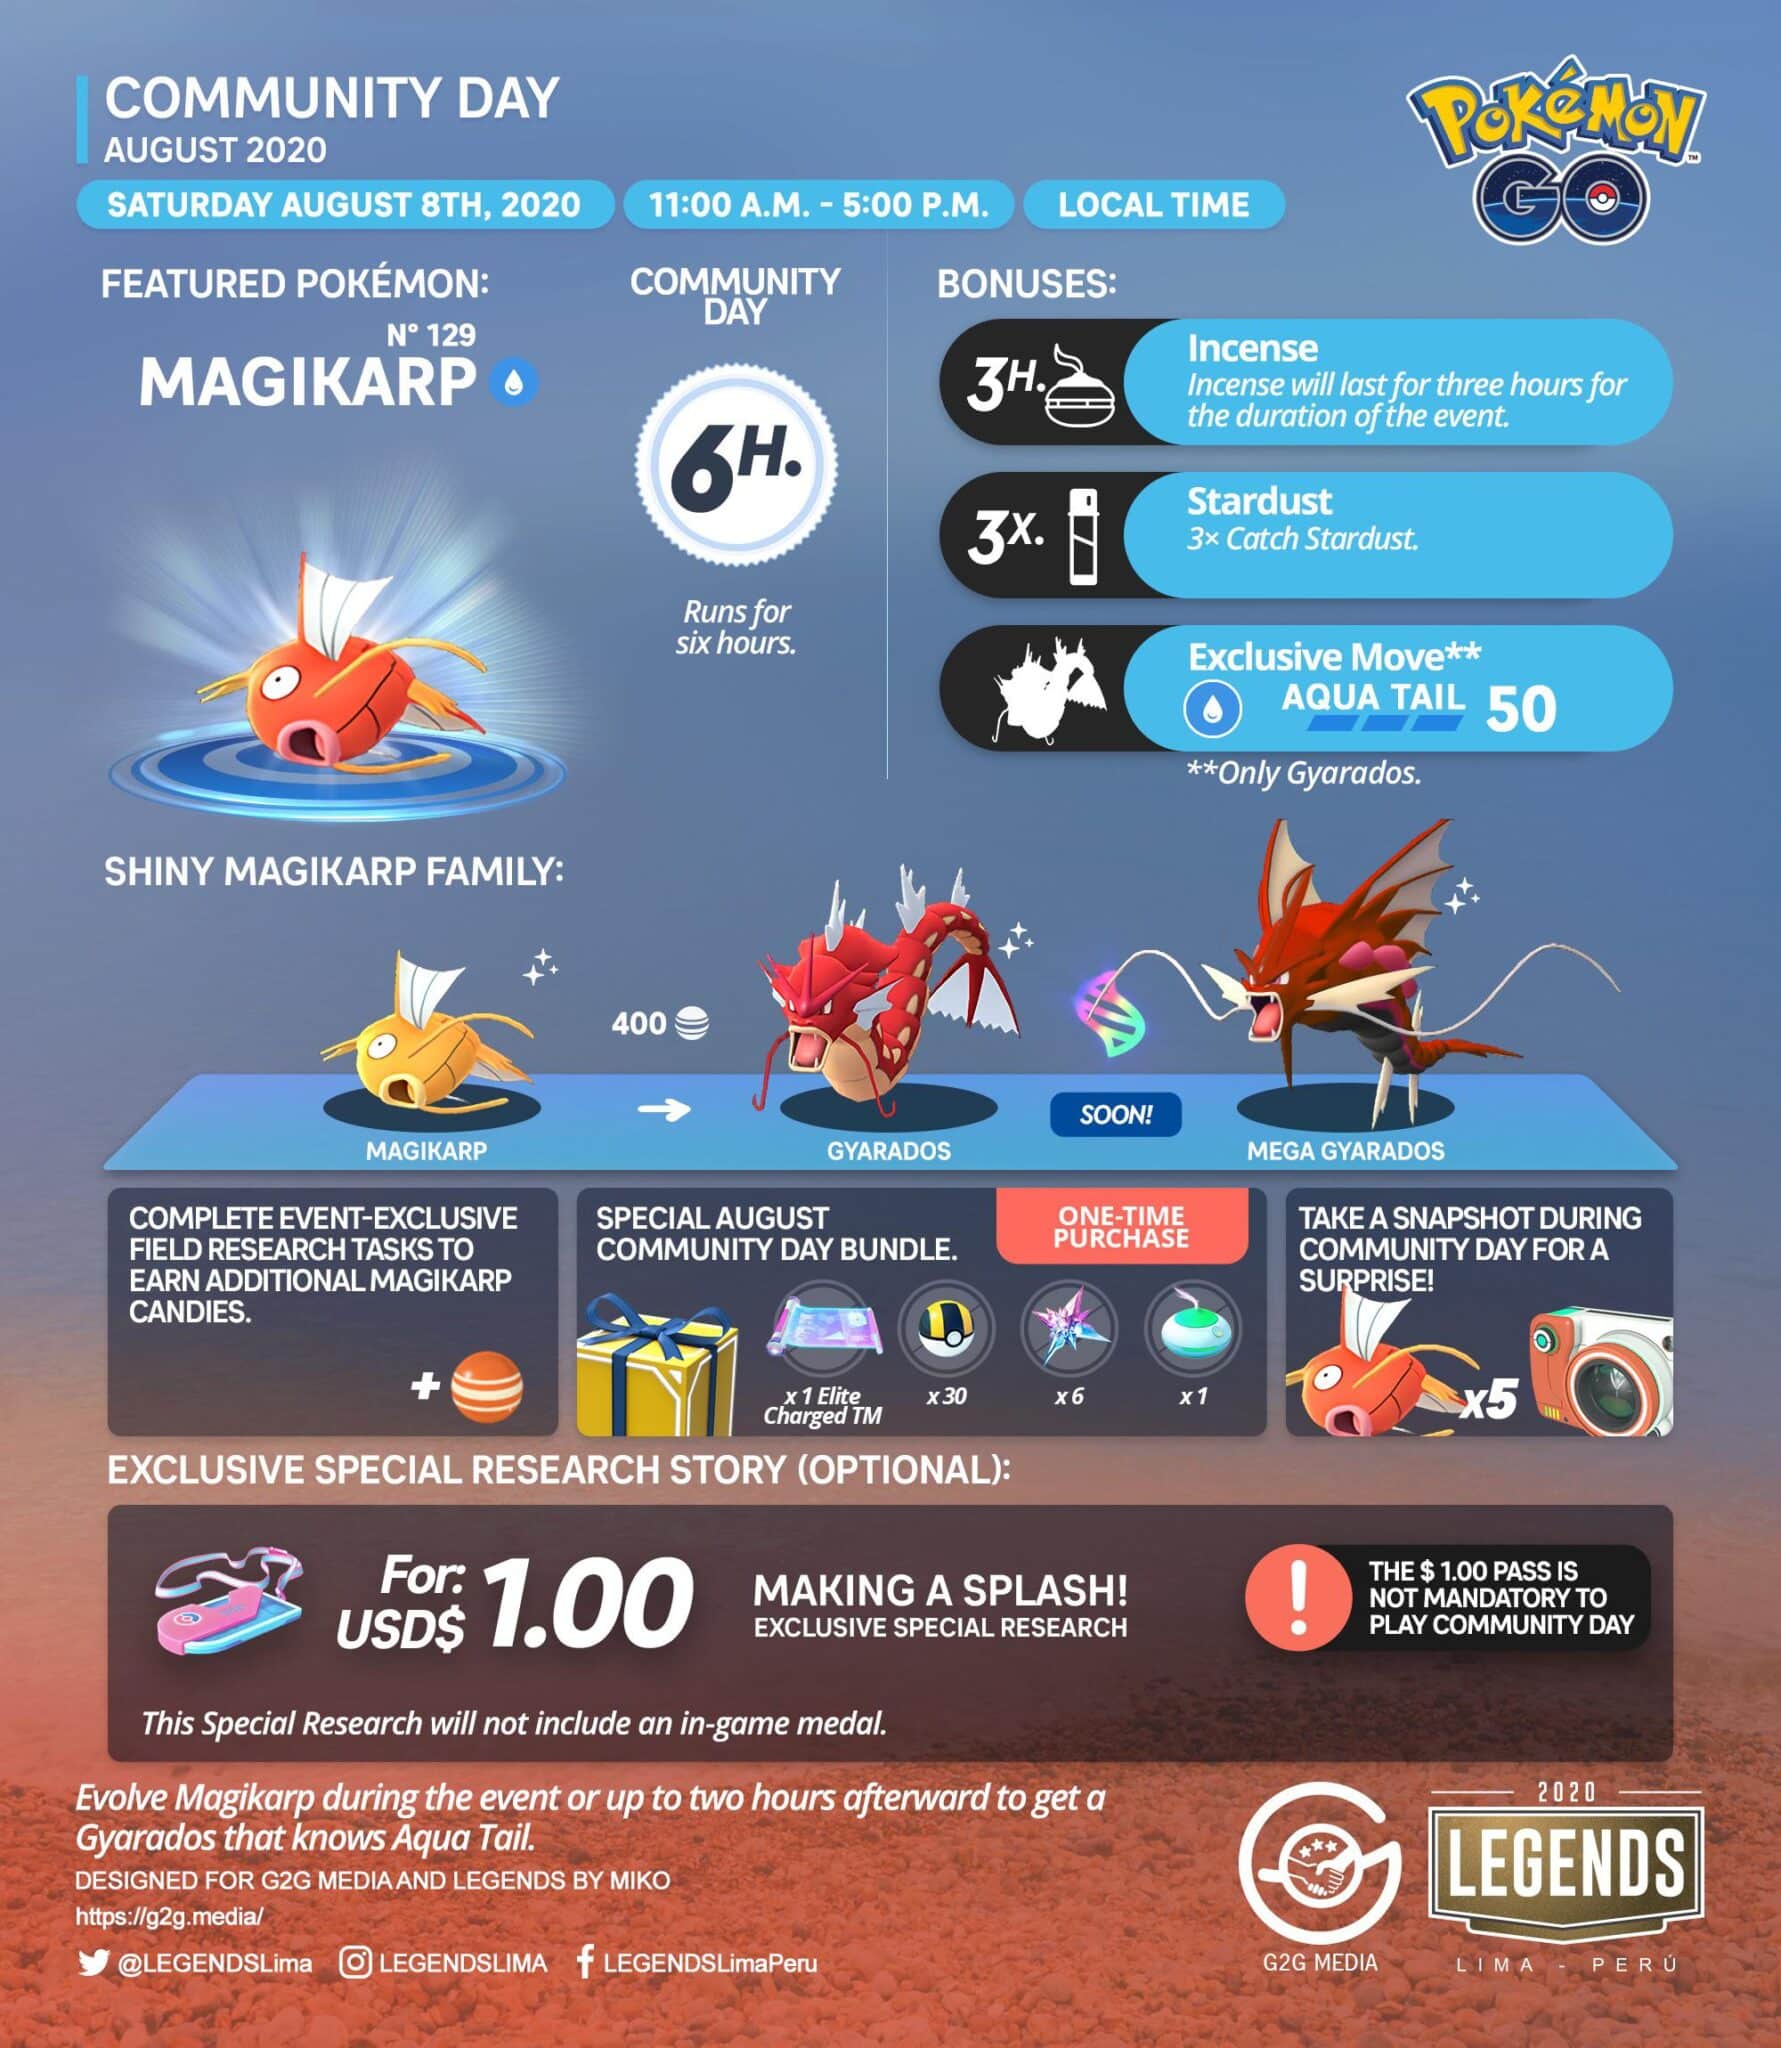 Pokemon Go August 2020 Community Day Date, Time & Featured Pokemon